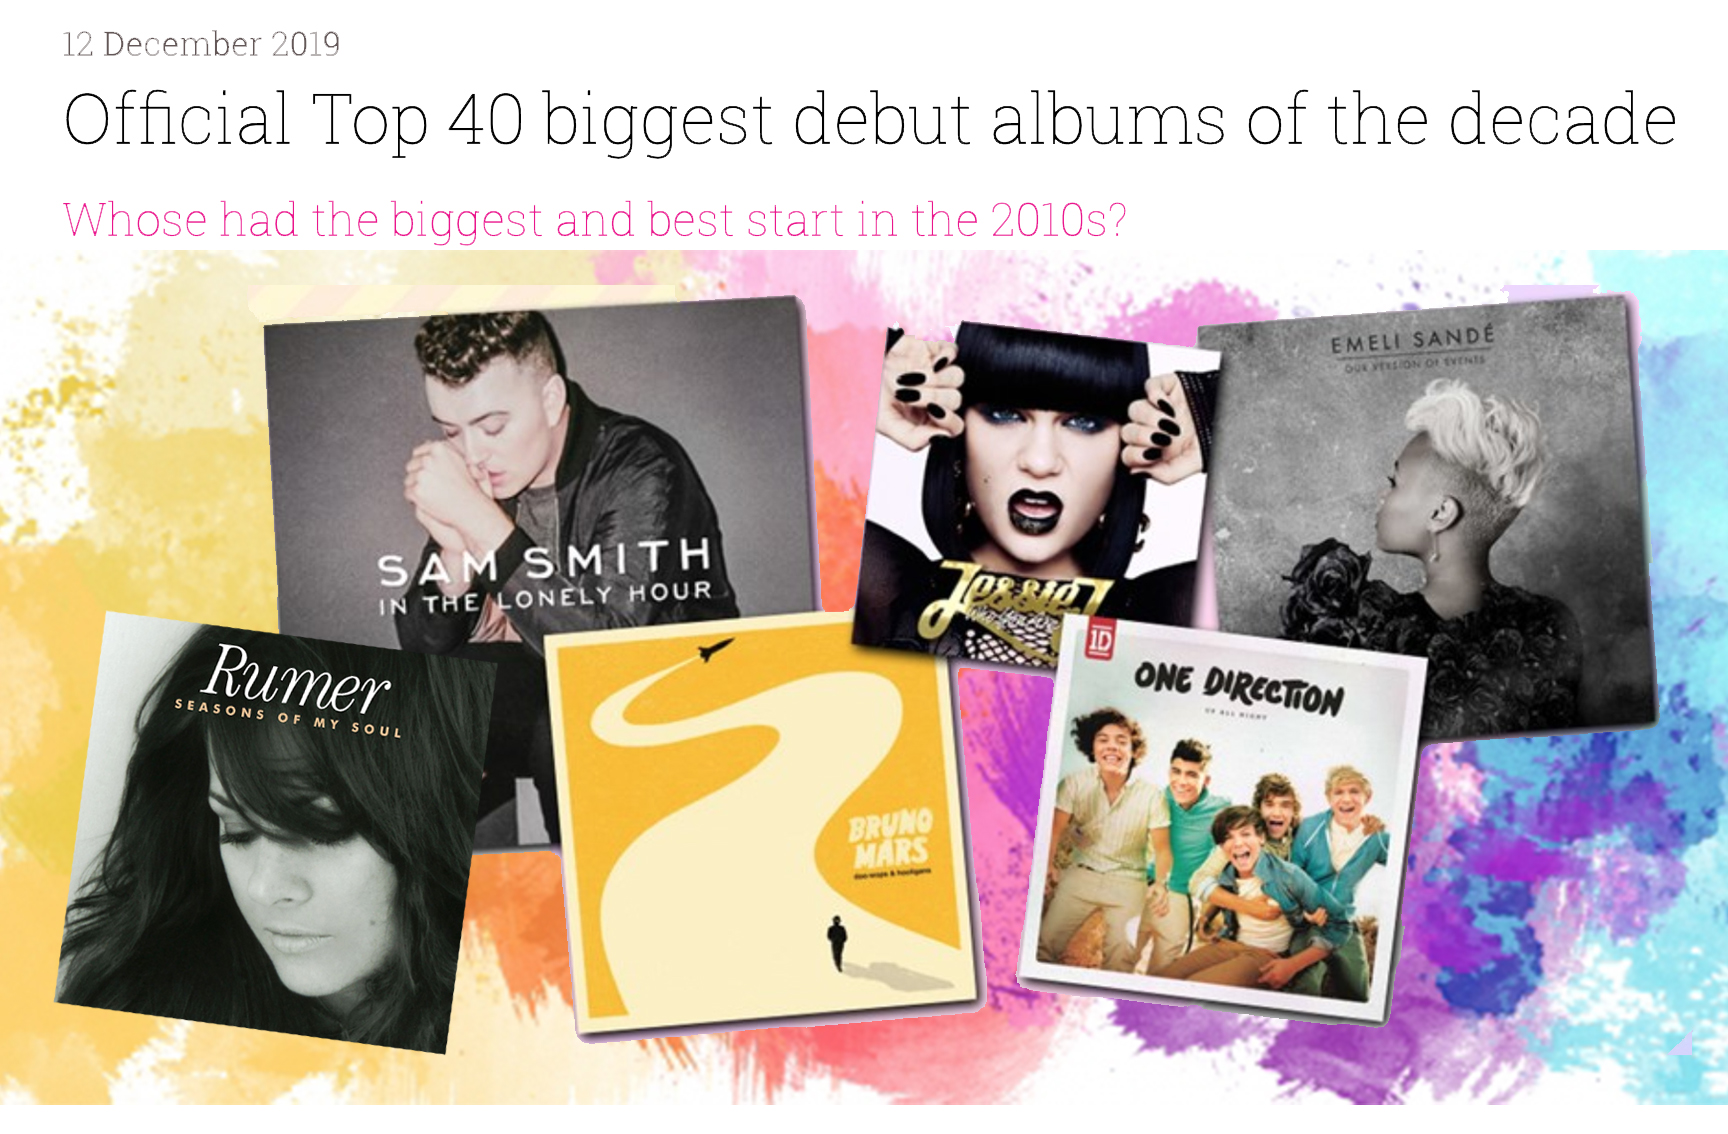 Rumer Top 40 Debut Albums of the decade